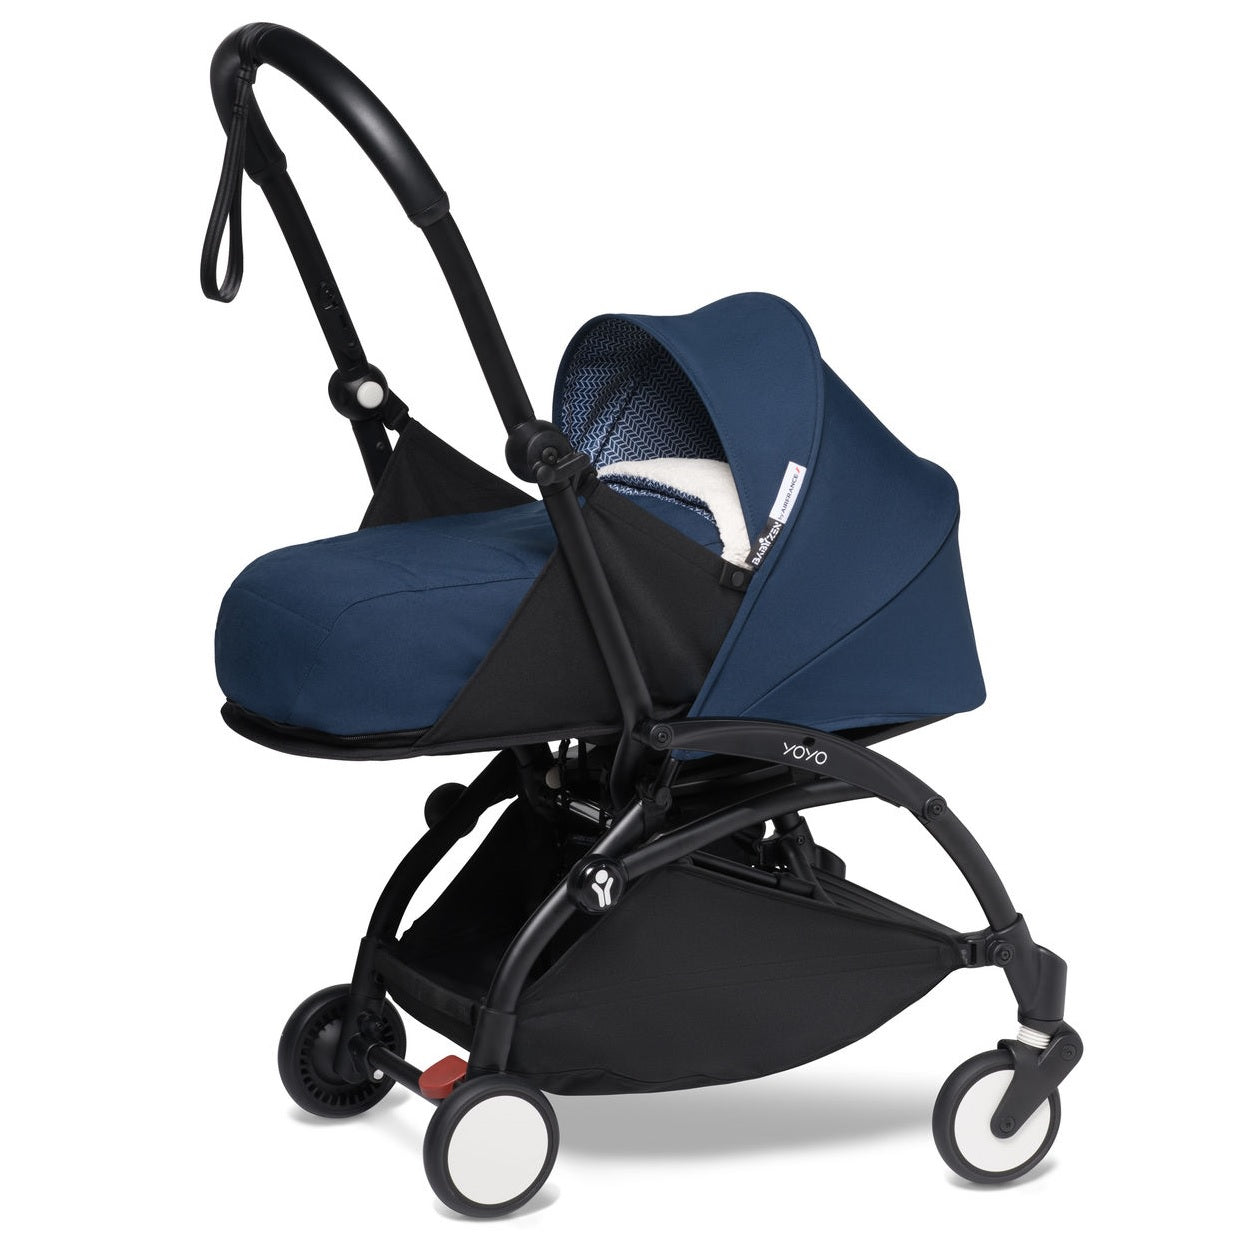 BABYZEN YOYO 6+ Color Pack, Black - Textiles Only: Seat Cushion, Matching  Canopy & Zippered Back Pocket - Requires YOYO2 Frame (Sold Separately)